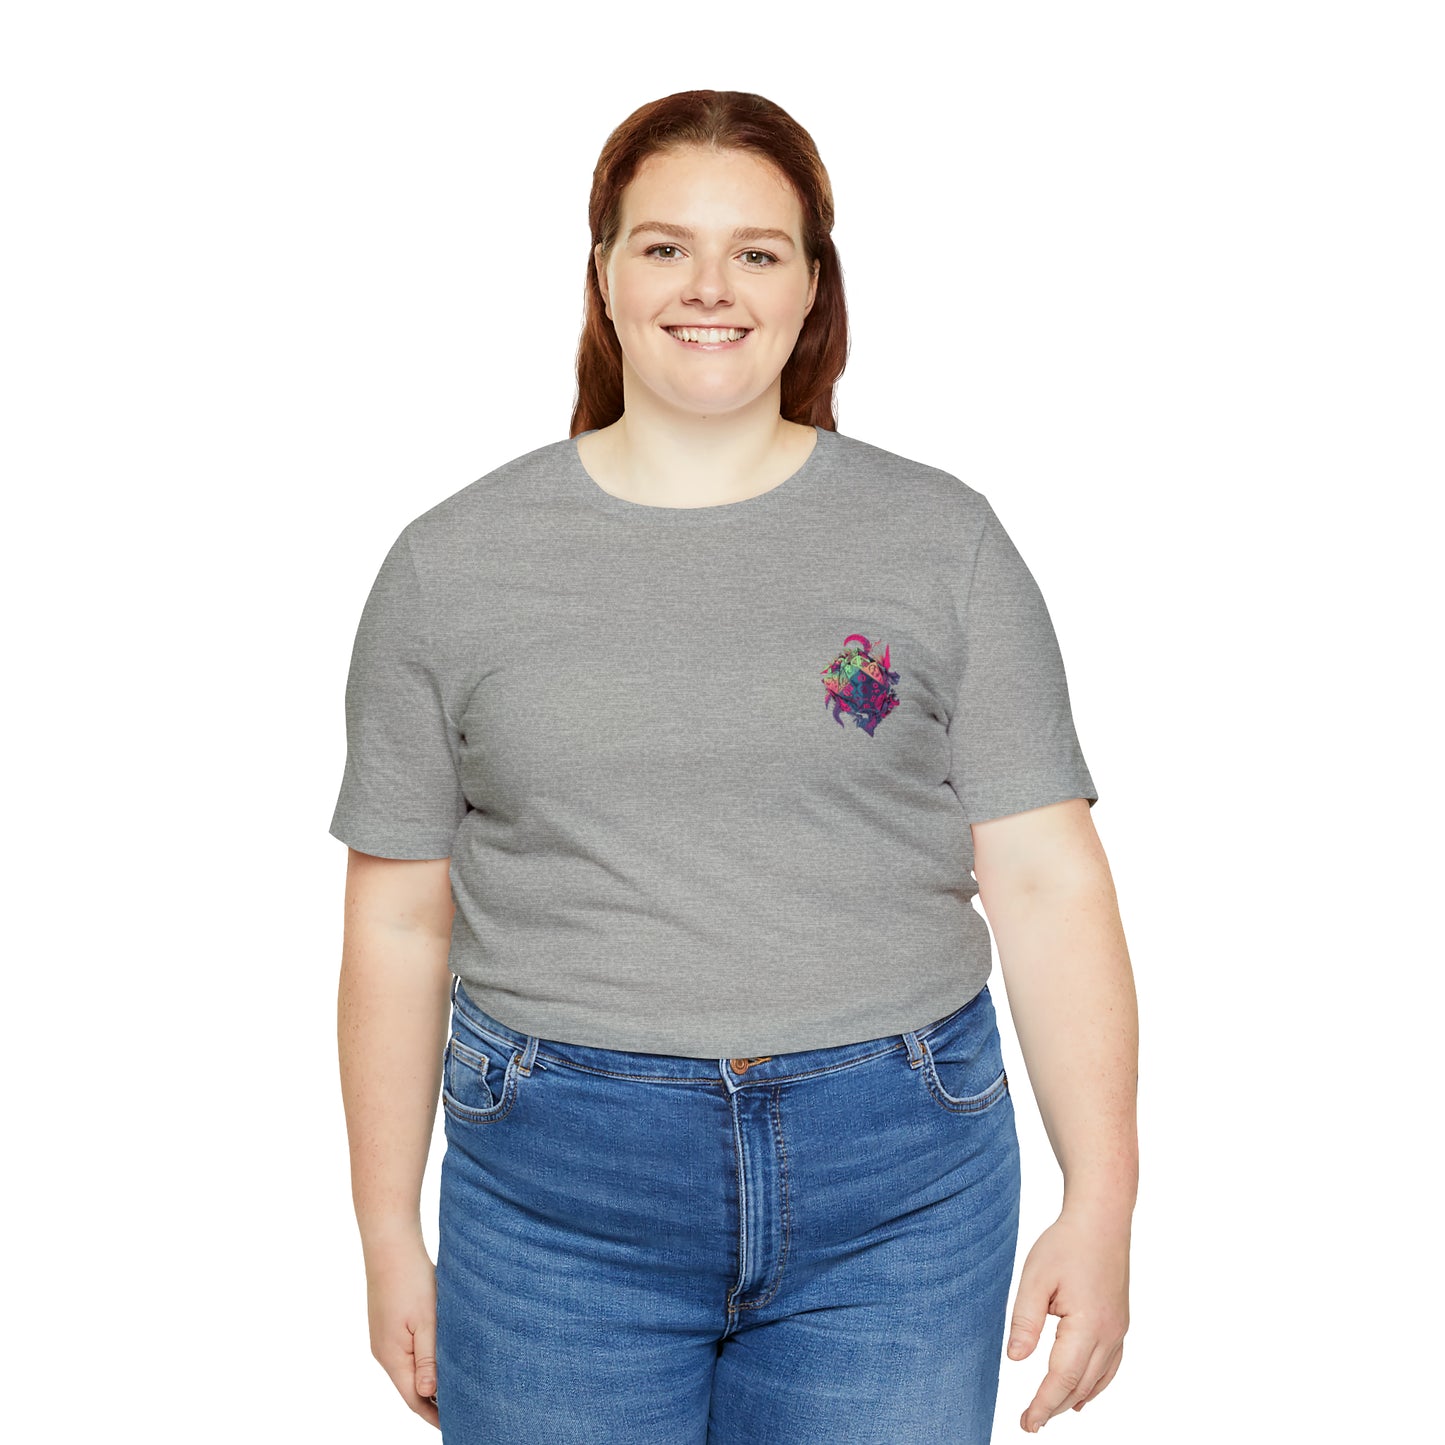 athletic-heather-quest-thread-tee-shirt-with-small-colorful-dice-in-pink-jungle-on-chest